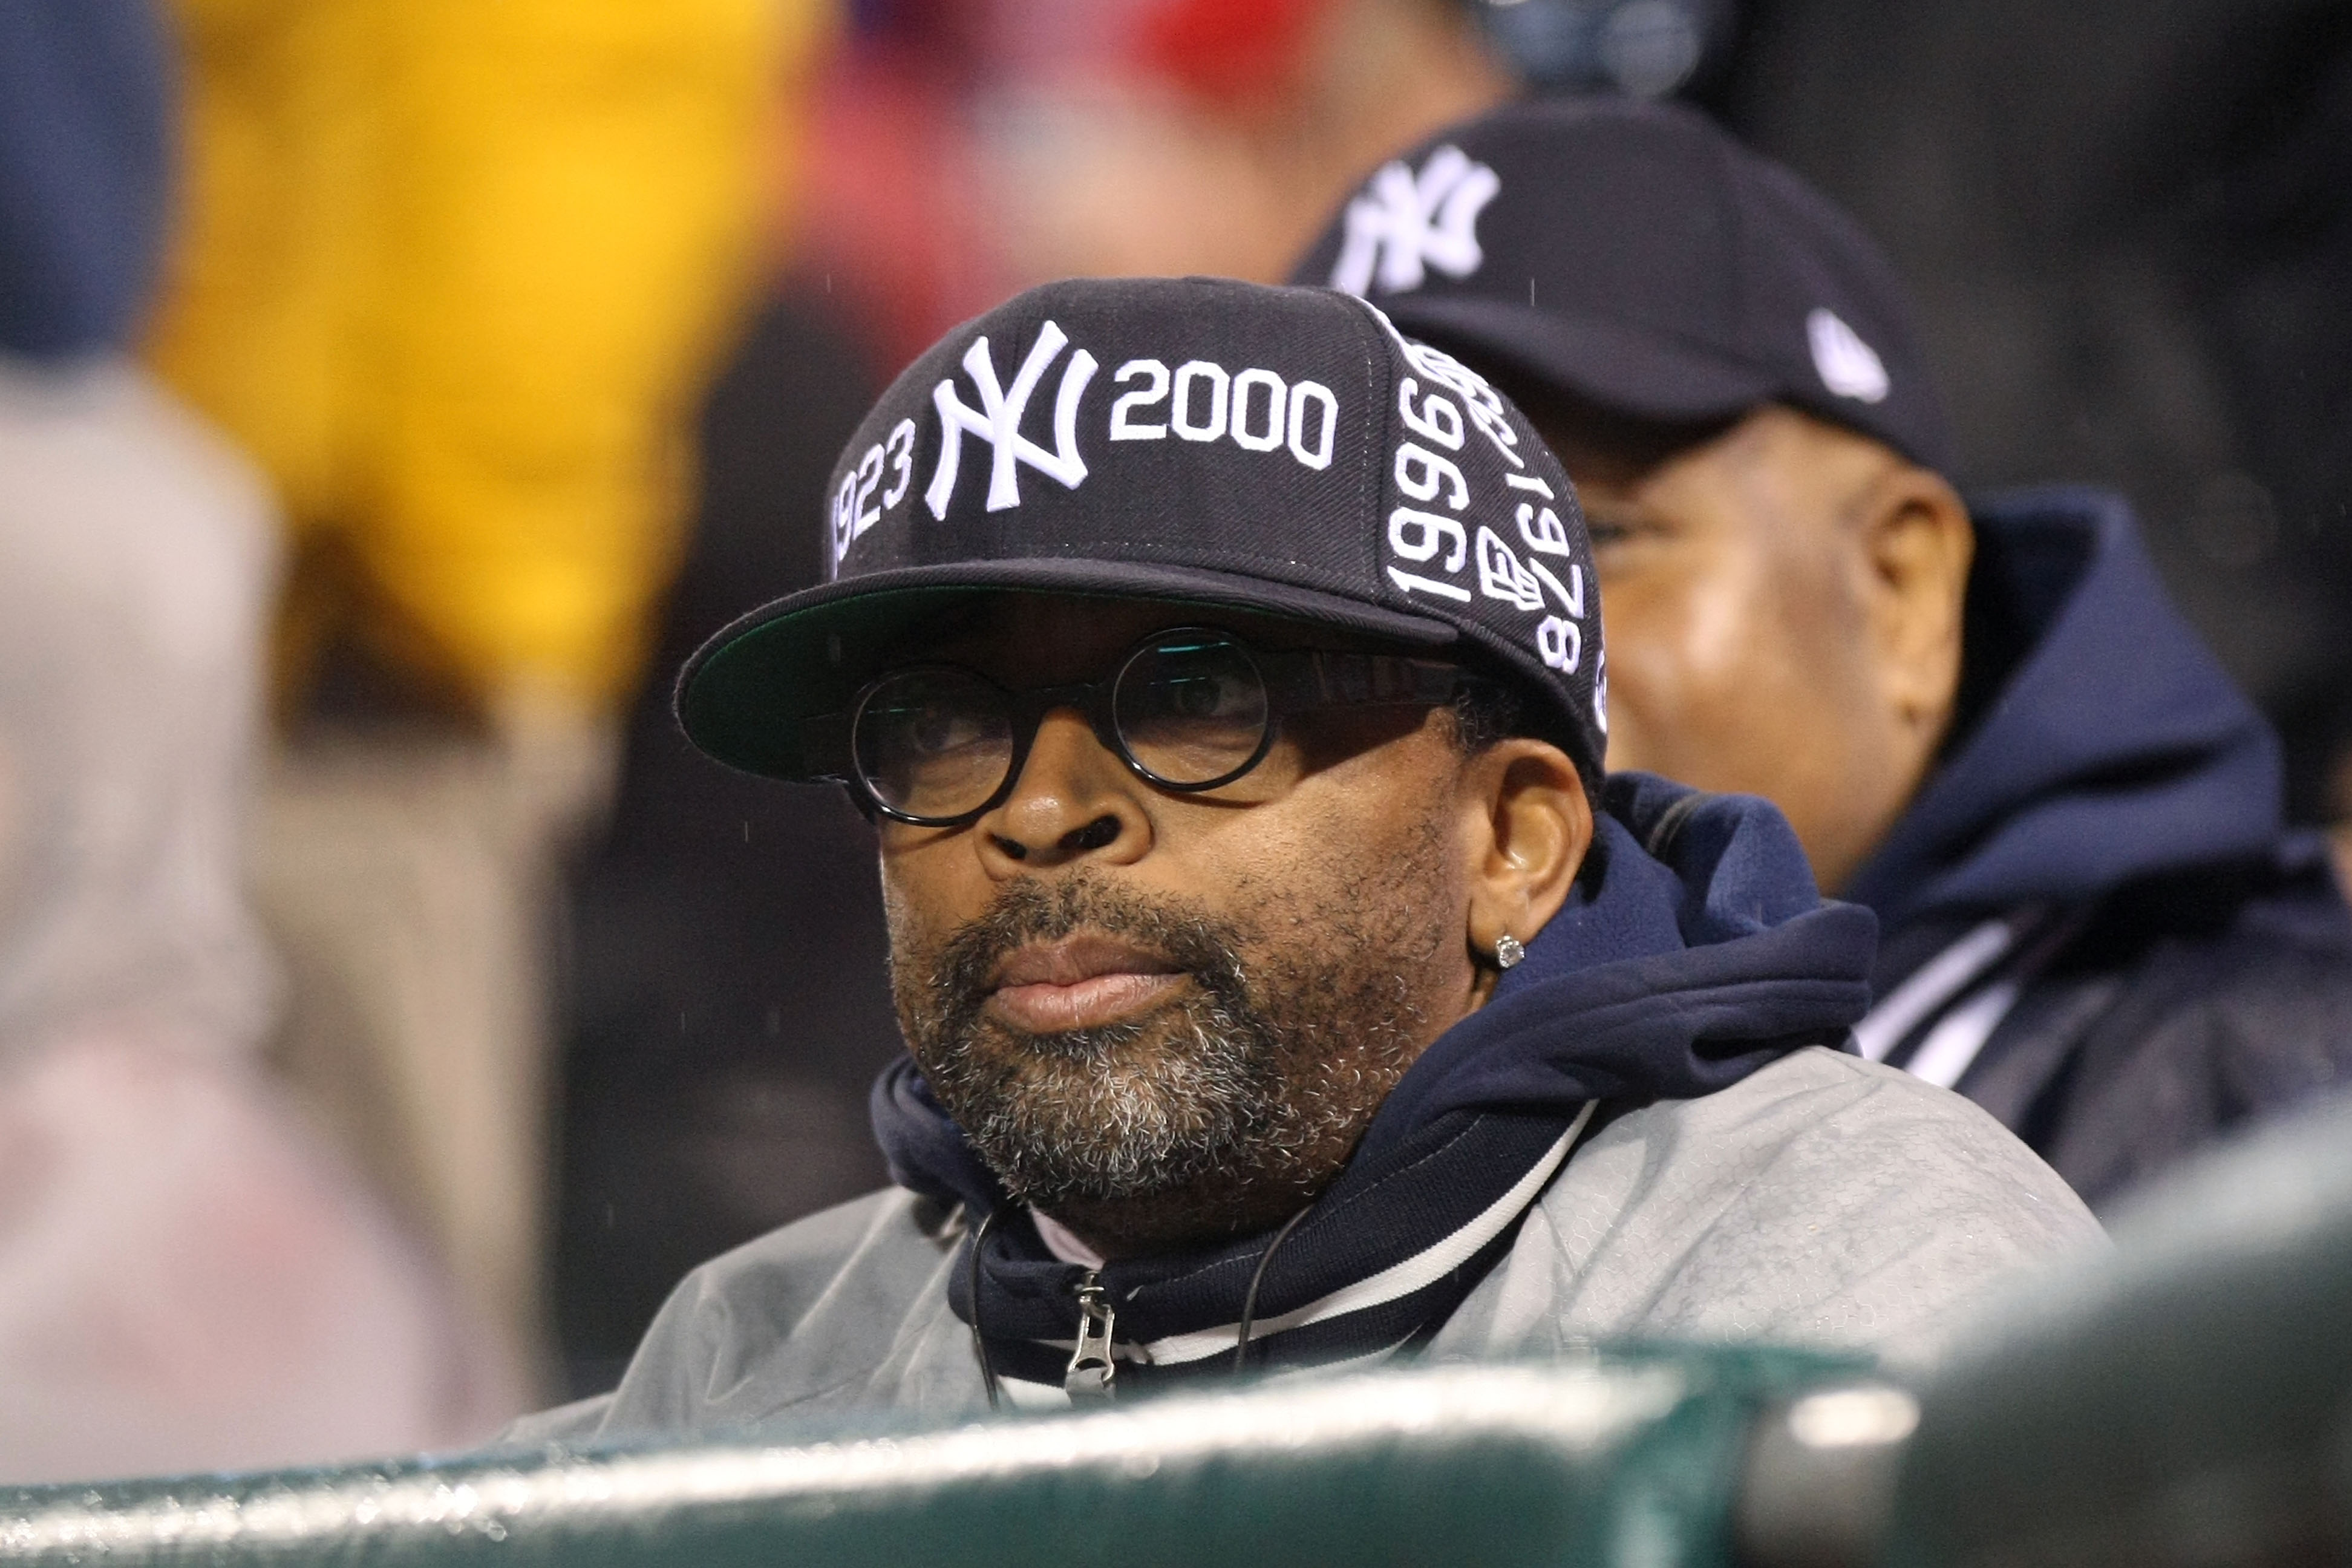 PHILADELPHIA - OCTOBER 31:  Spike Lee watches the New York Yankees take on the Philadelphia Phillies in Game Three of the 2009 MLB World Series at Citizens Bank Park on October 31, 2009 in Philadelphia, Pennsylvania.  (Photo by Nick Laham/Getty Images)